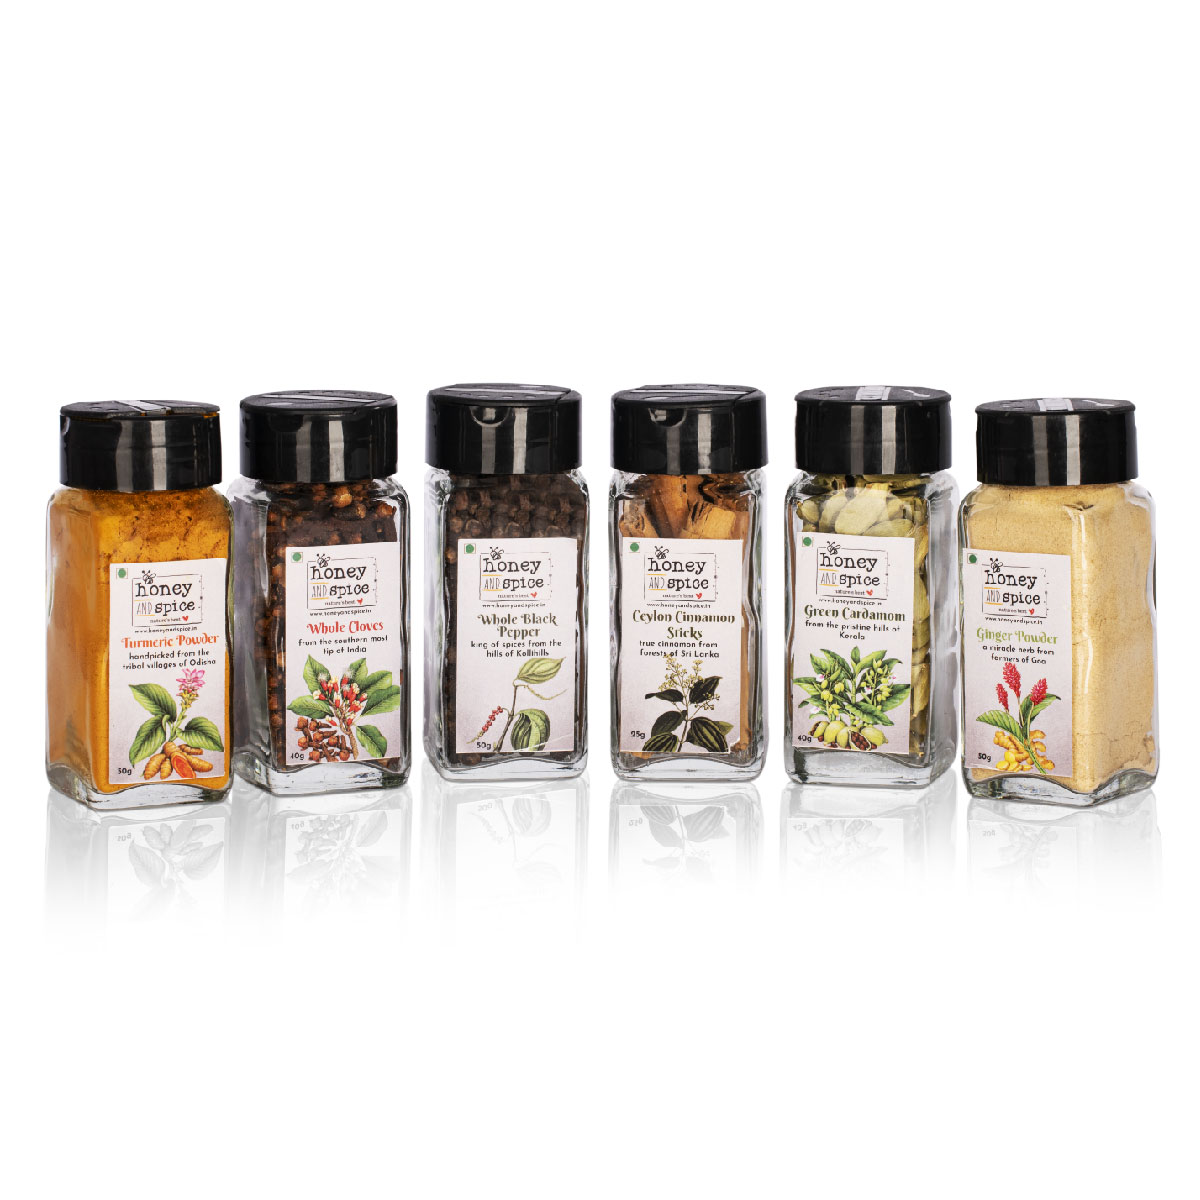 Product: Honey and Spice Spice Sampler Set